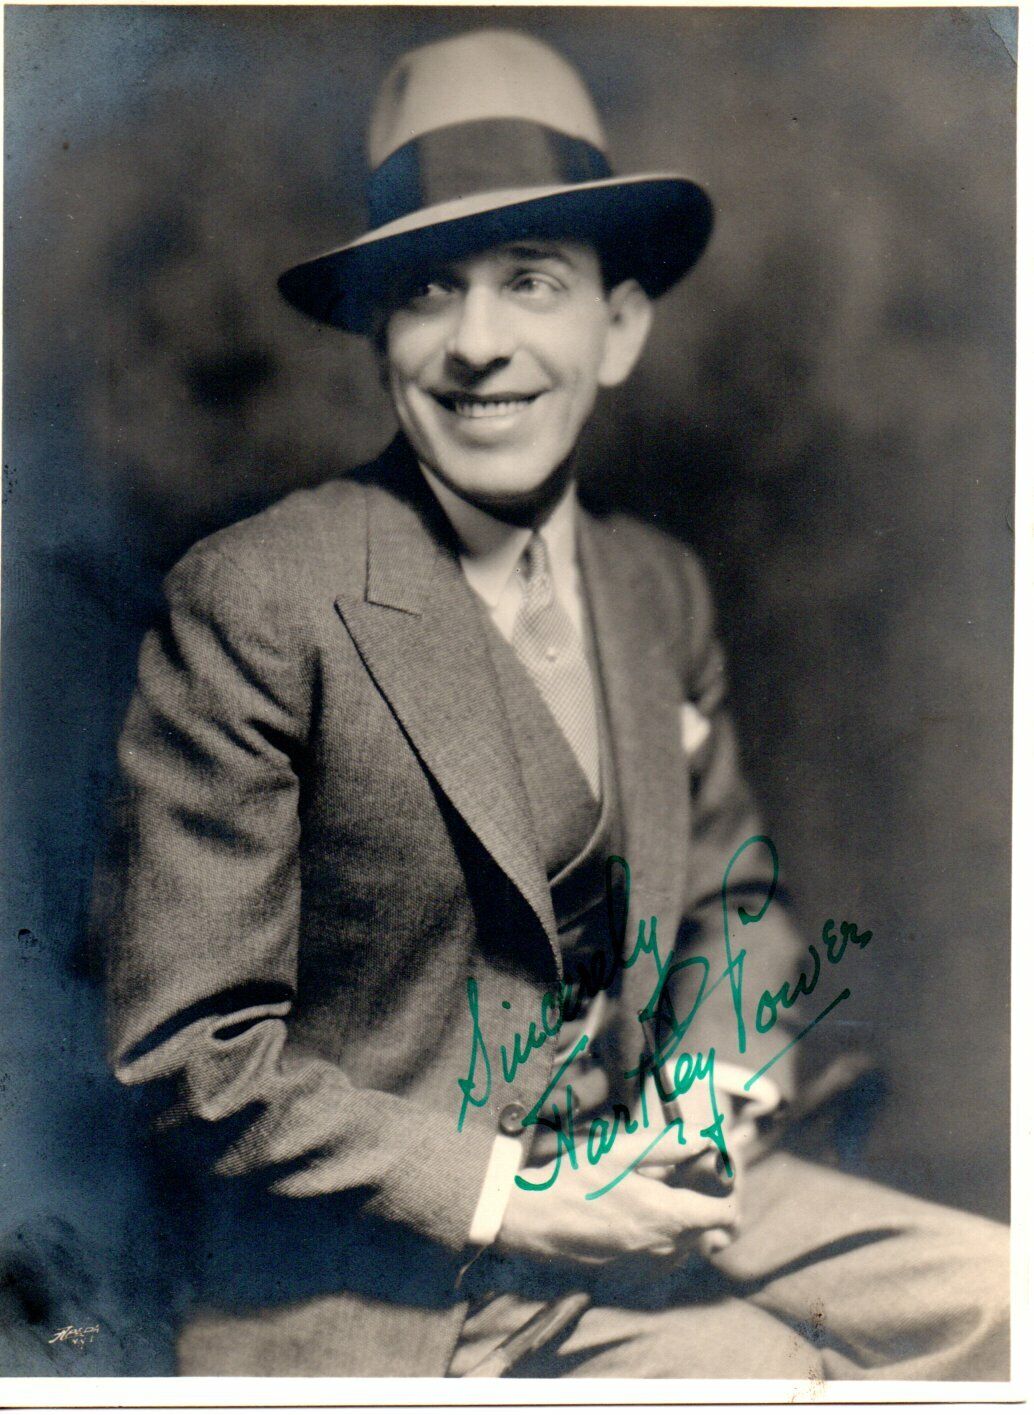 HARTLEY POWER RARE HAND SIGNED Photo Poster painting 7X5 AMERICAN HOLLYWOOD FILM ACTOR